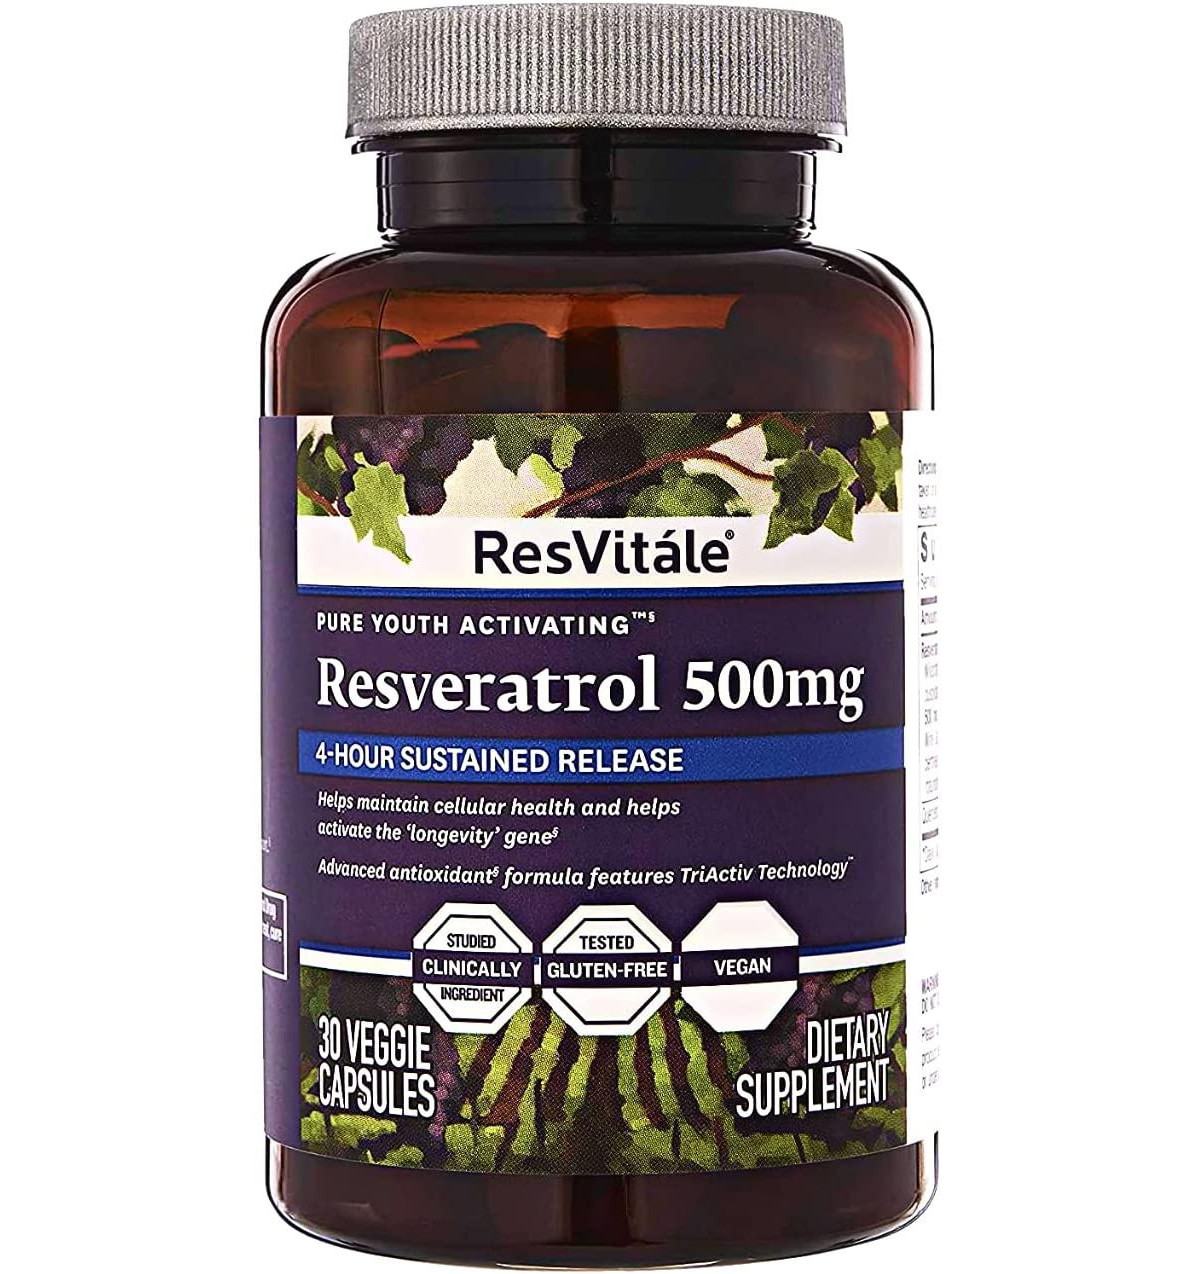 Resveratrol 500mg - Antioxidants for Heart Health & Skin Support - Red Wine Grape Seed Extract - 30 Vegetarian Capsules